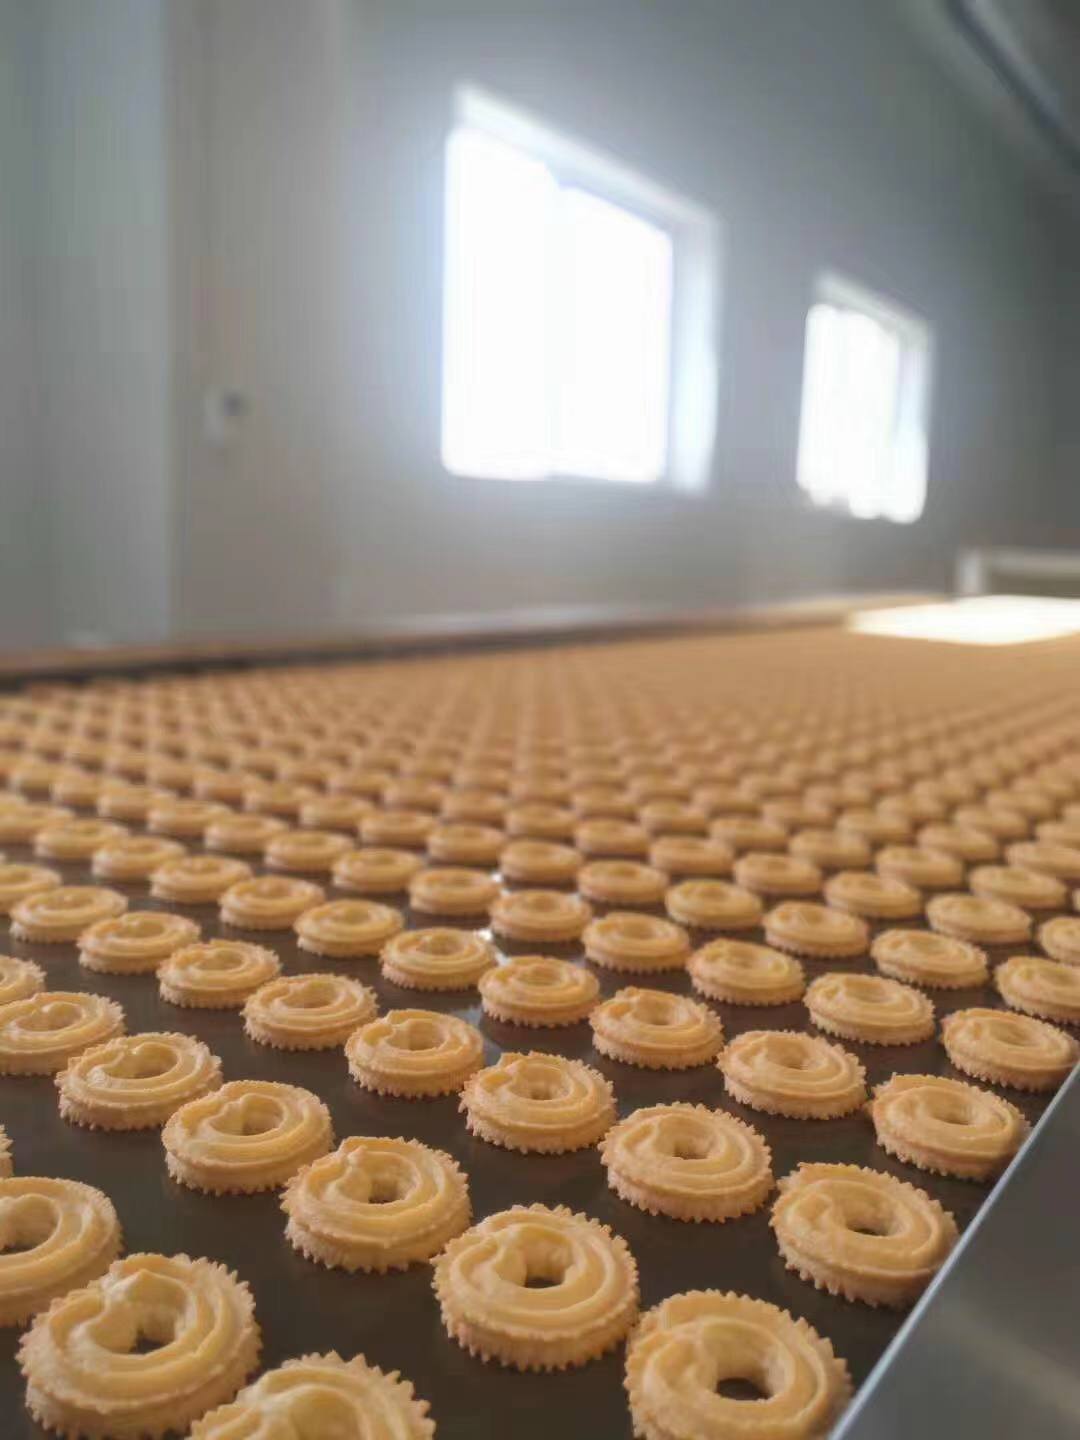 SINOBAKE Automatic Cookie Production Line (Wire- Cut and Depositor)